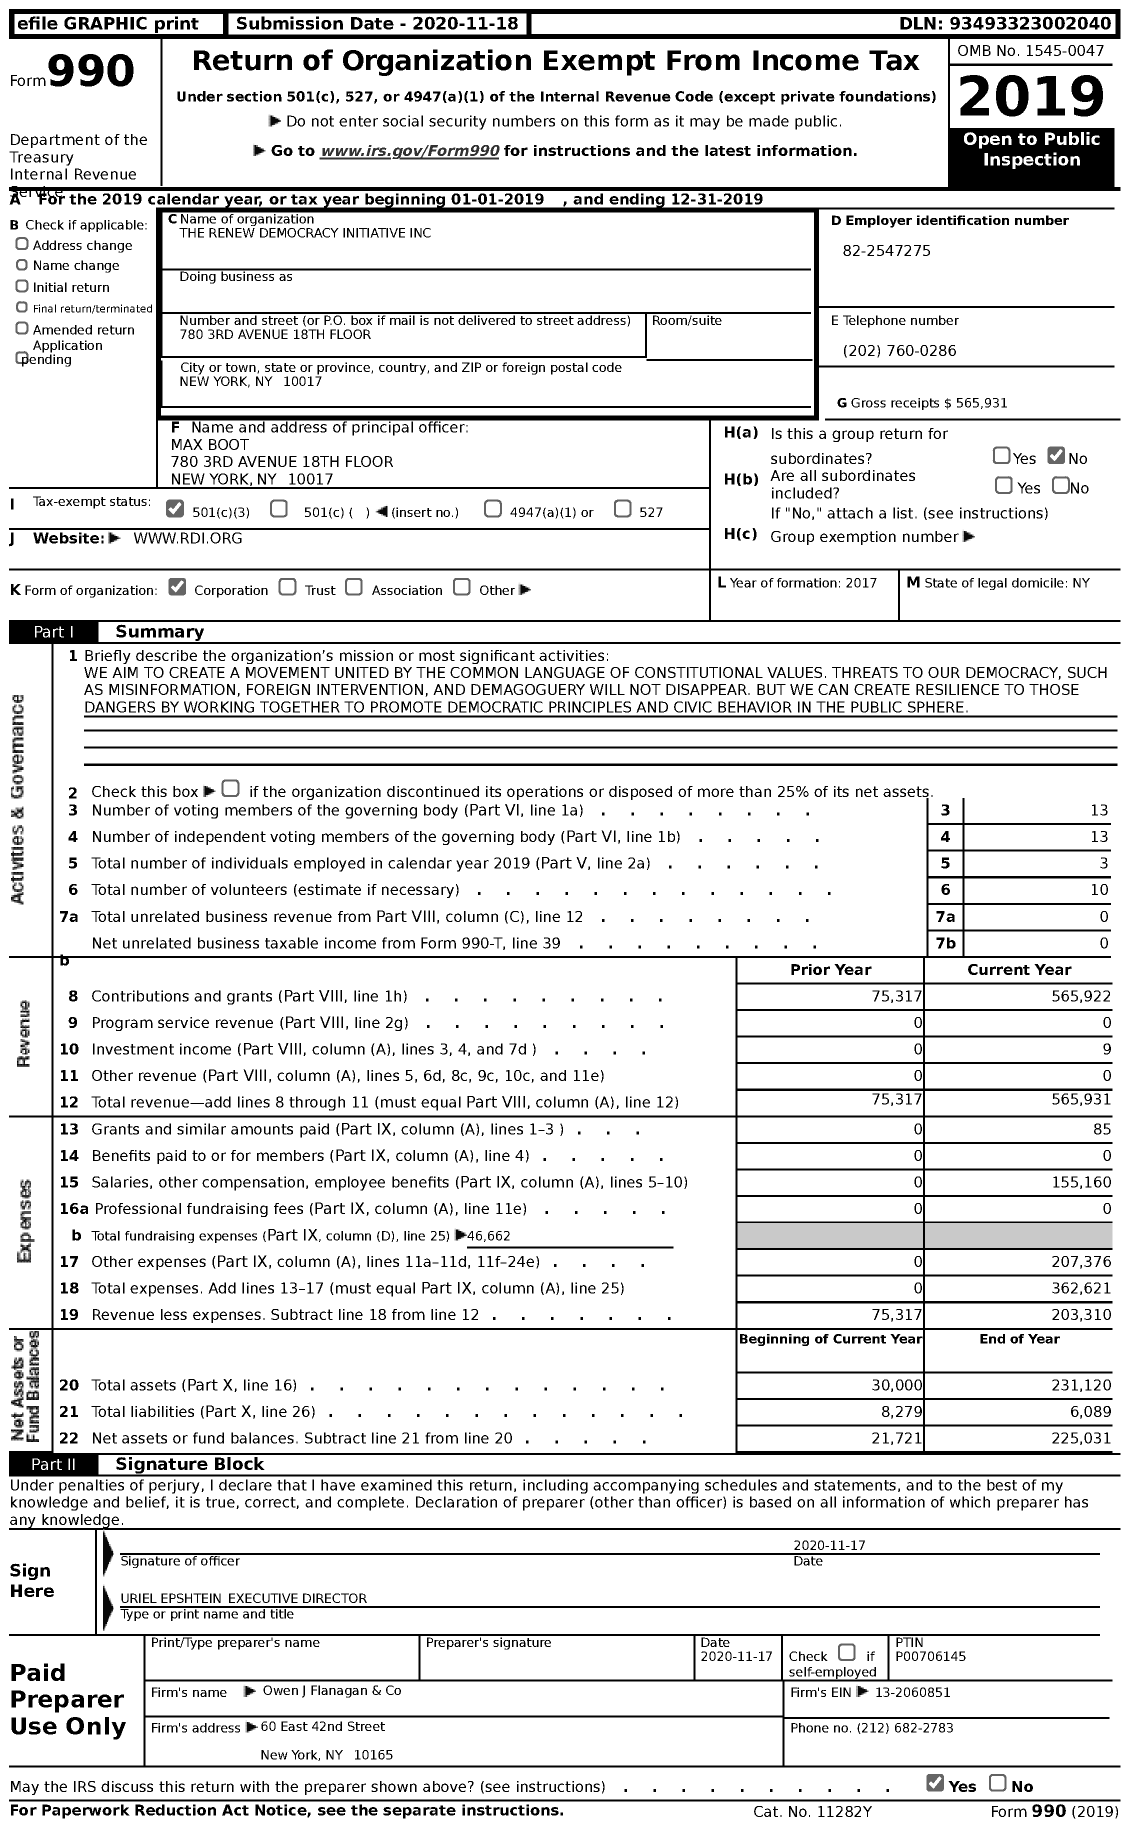 Image of first page of 2019 Form 990 for The Renew Democracy Initiative